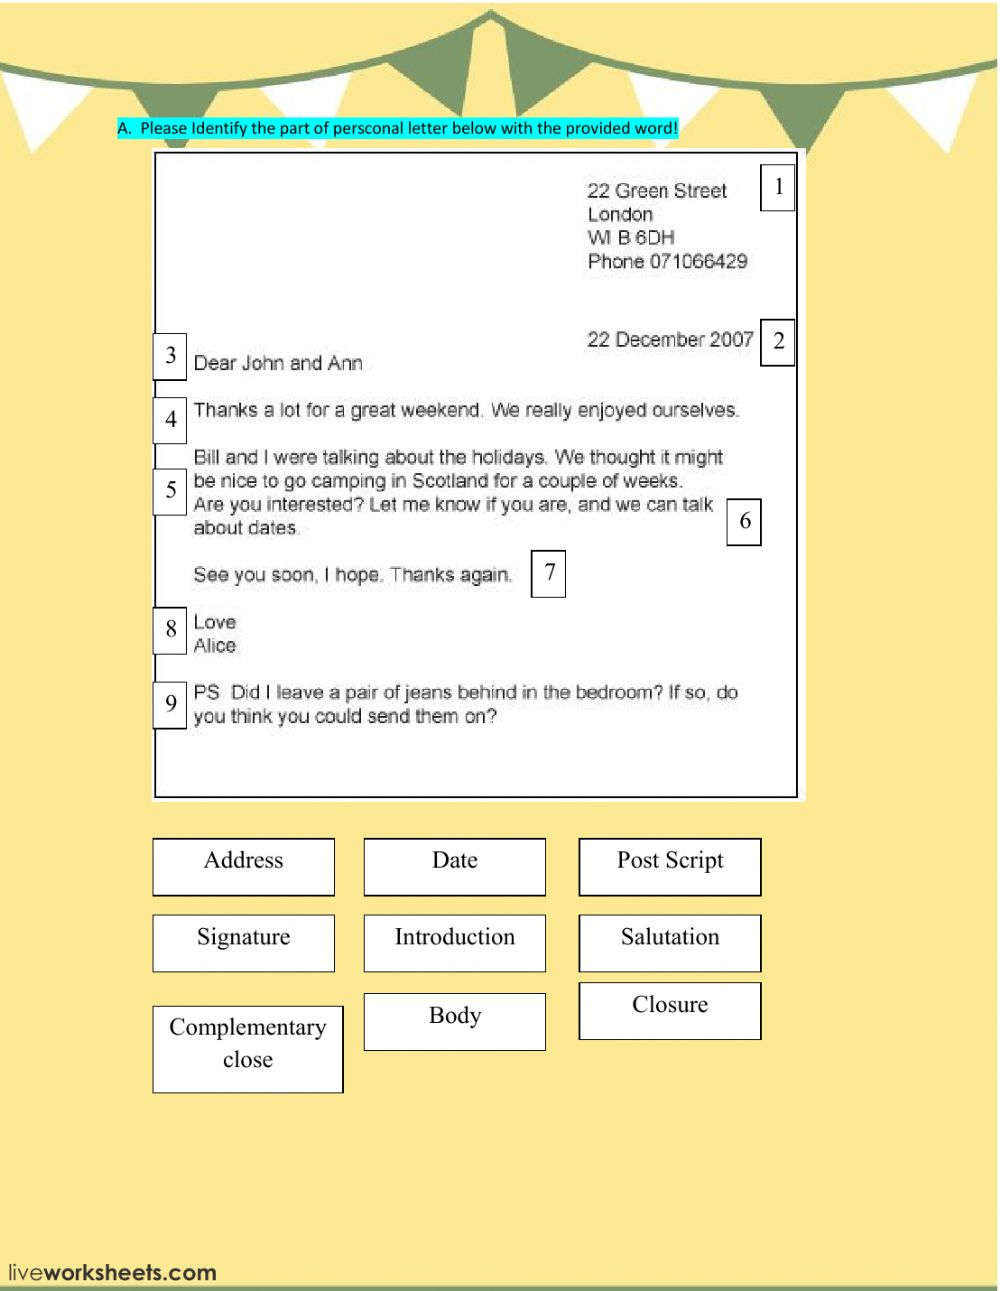 Review Personal Letter - Interactive Worksheet within Letter Worksheets Review